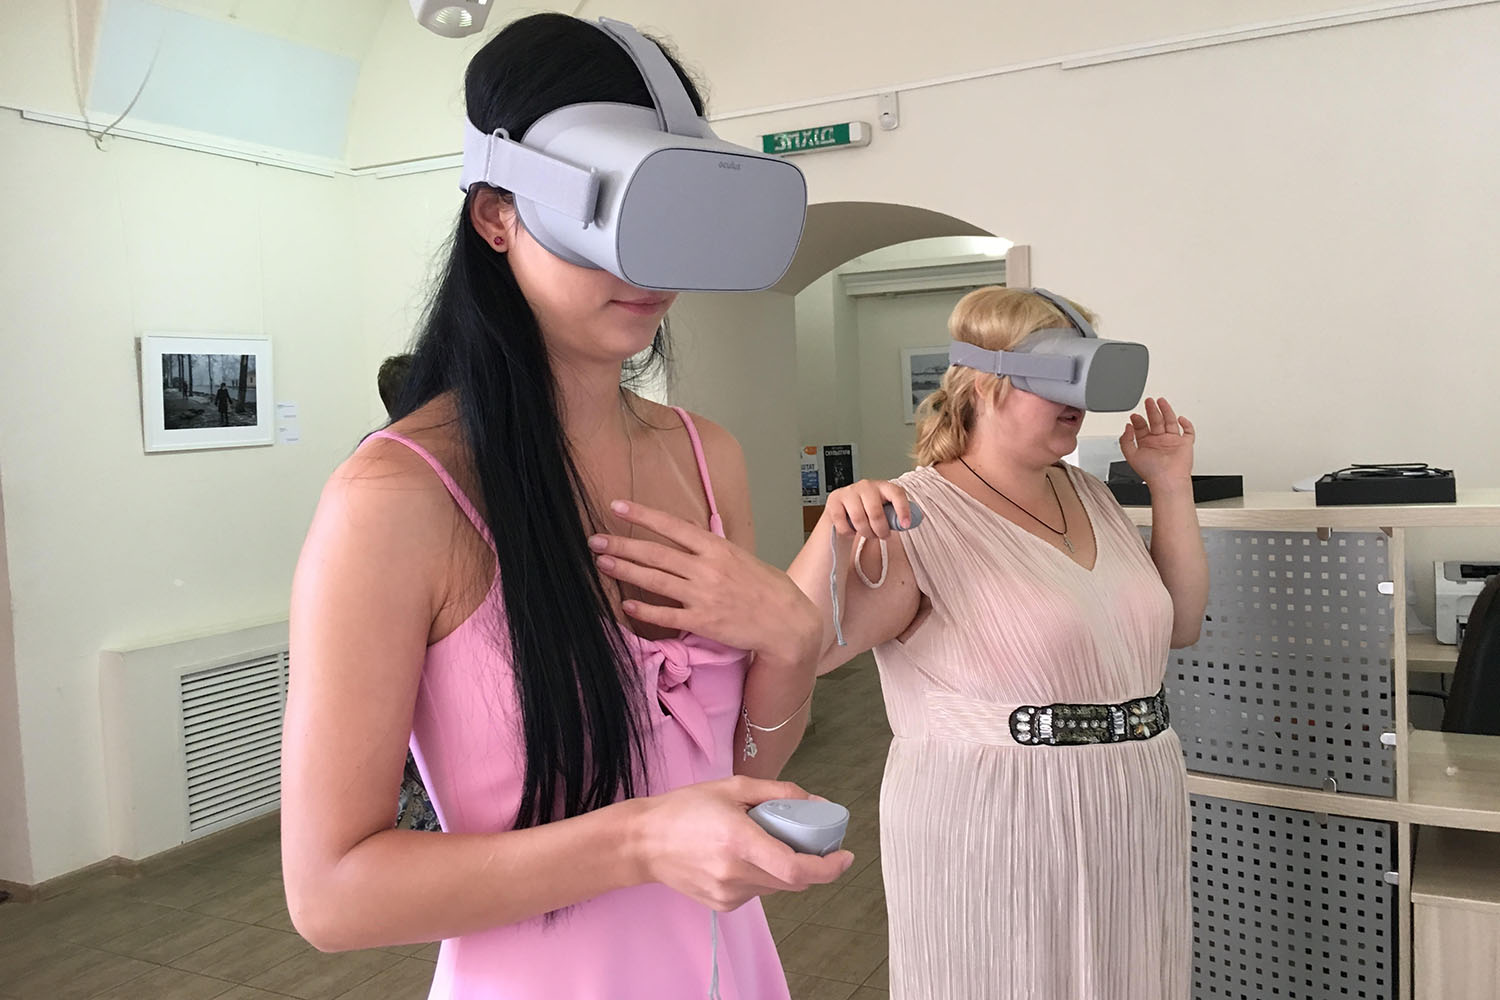  Watching 360º videos at Brotherland exhibition at the Sumy City Gallery. Sumy, Ukraine. August 2018. 